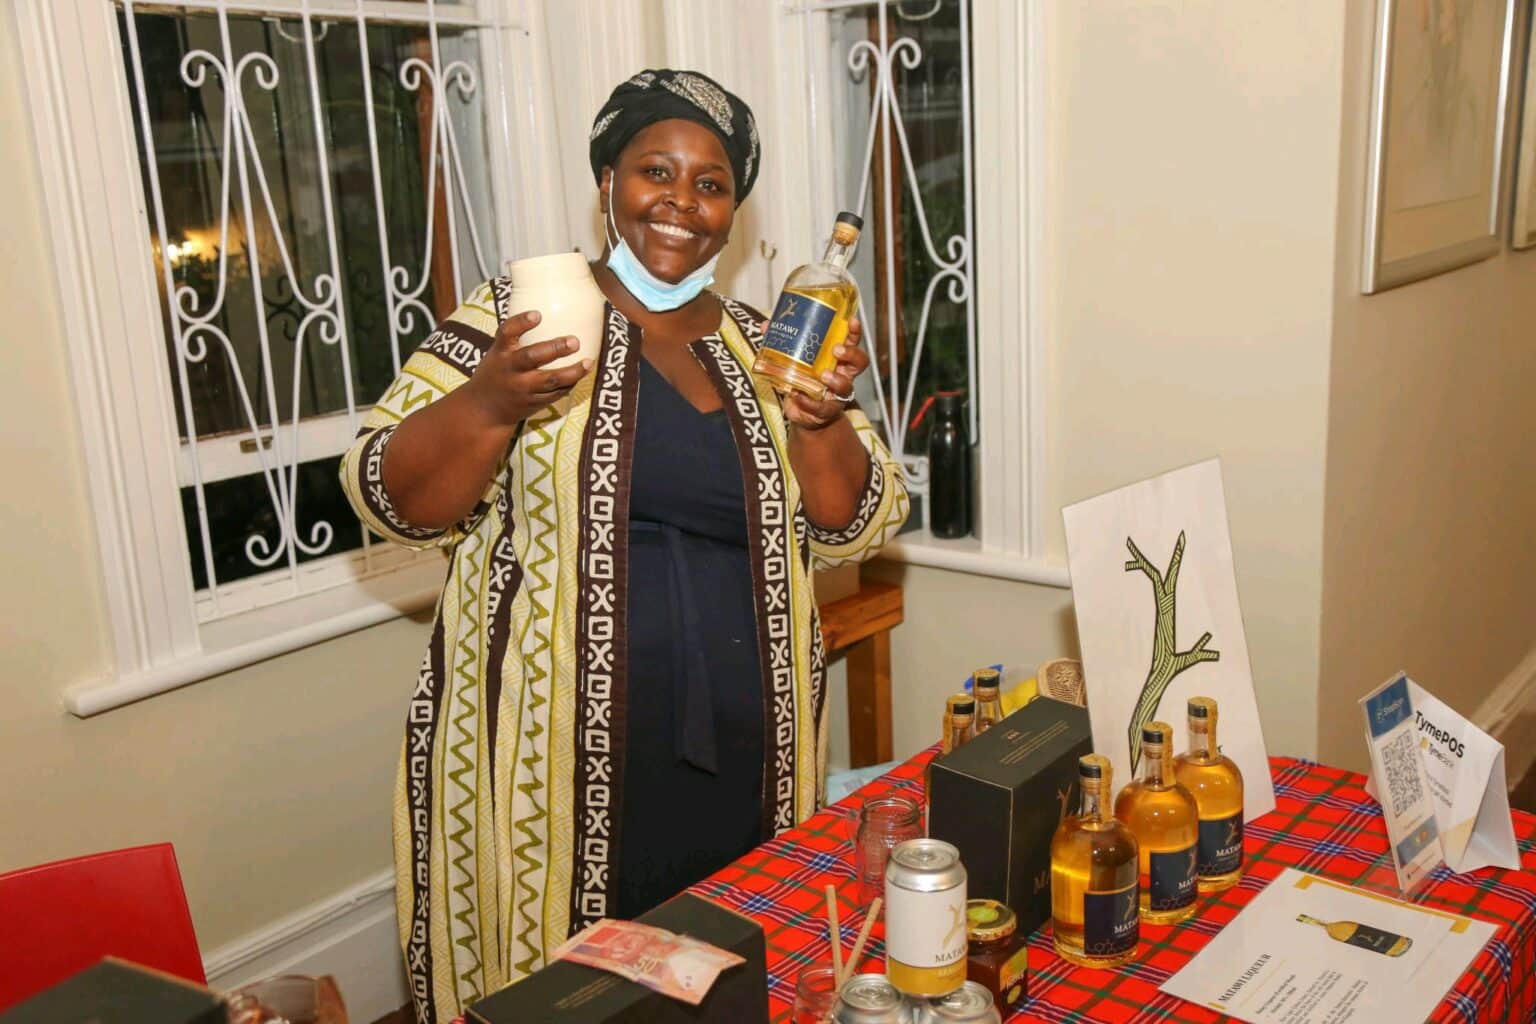 Khanya Mncwabe, founder of Matawi Mead in Cape Town, South Africa